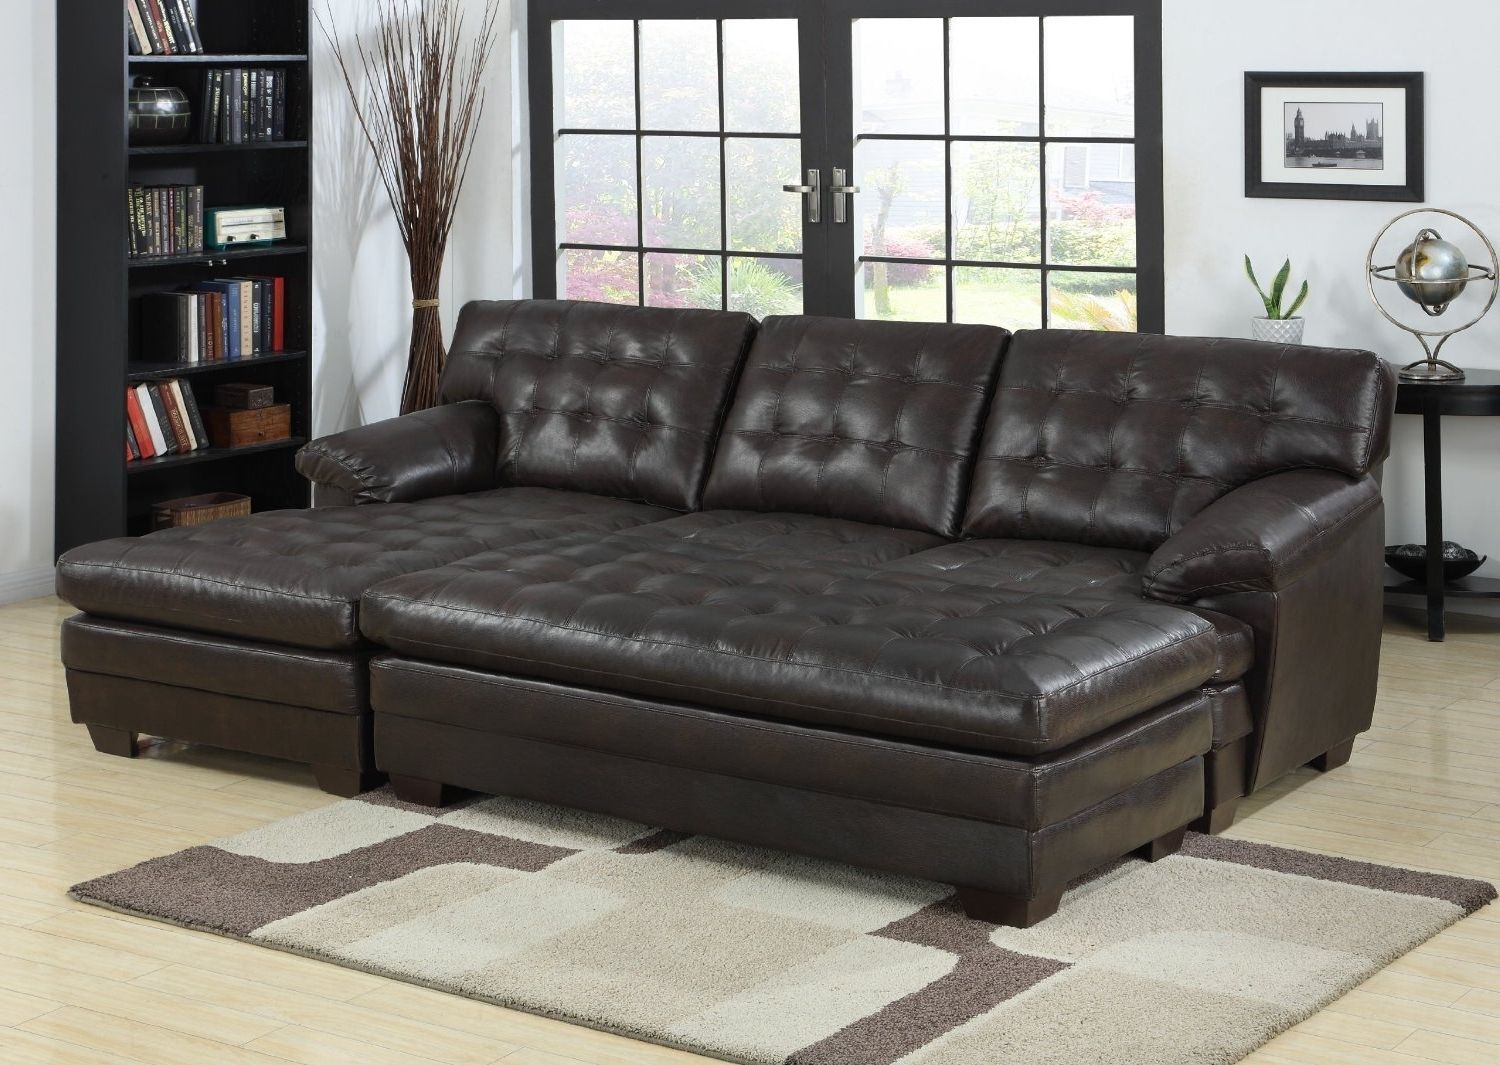 Most Recent Ethan Allen Sectional Sofas Double Chaise Sectional U Shaped Inside Sectional Sofas With Chaise Lounge (View 12 of 15)